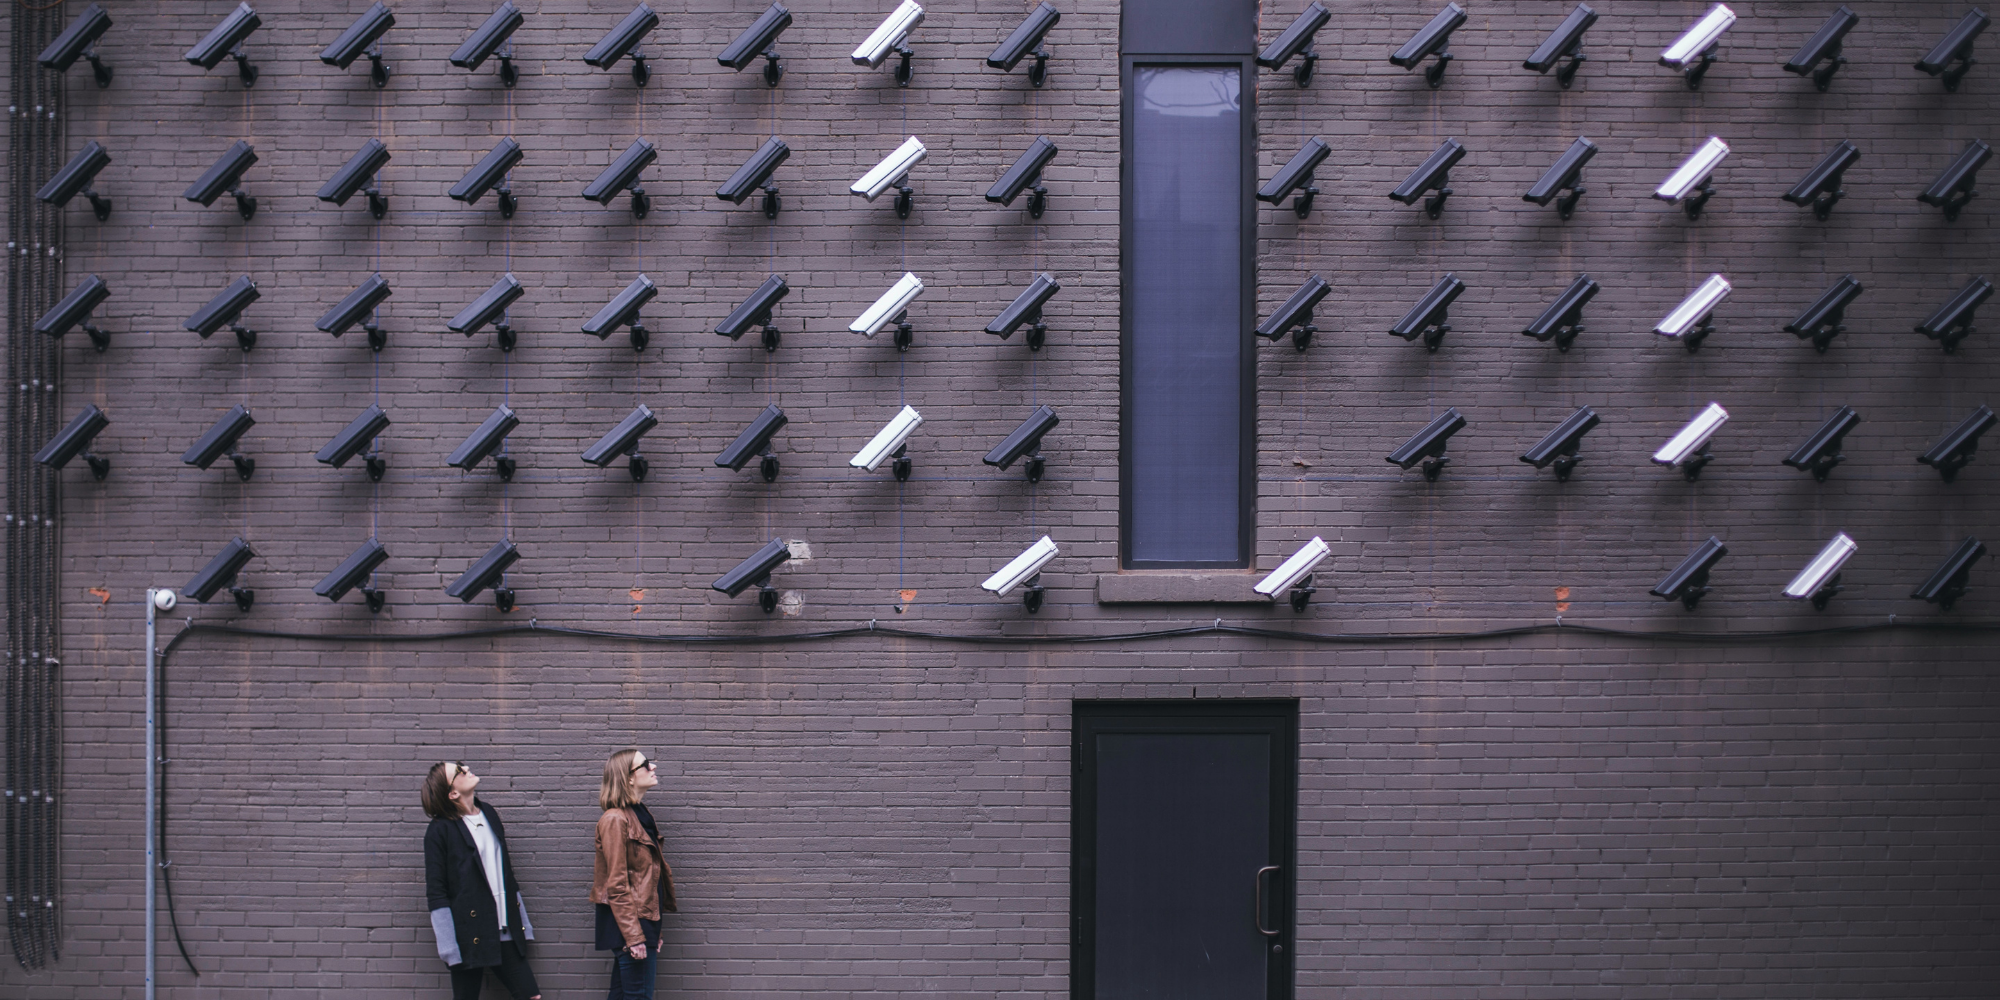 International Marketing News: Privacy and The Future of Retail